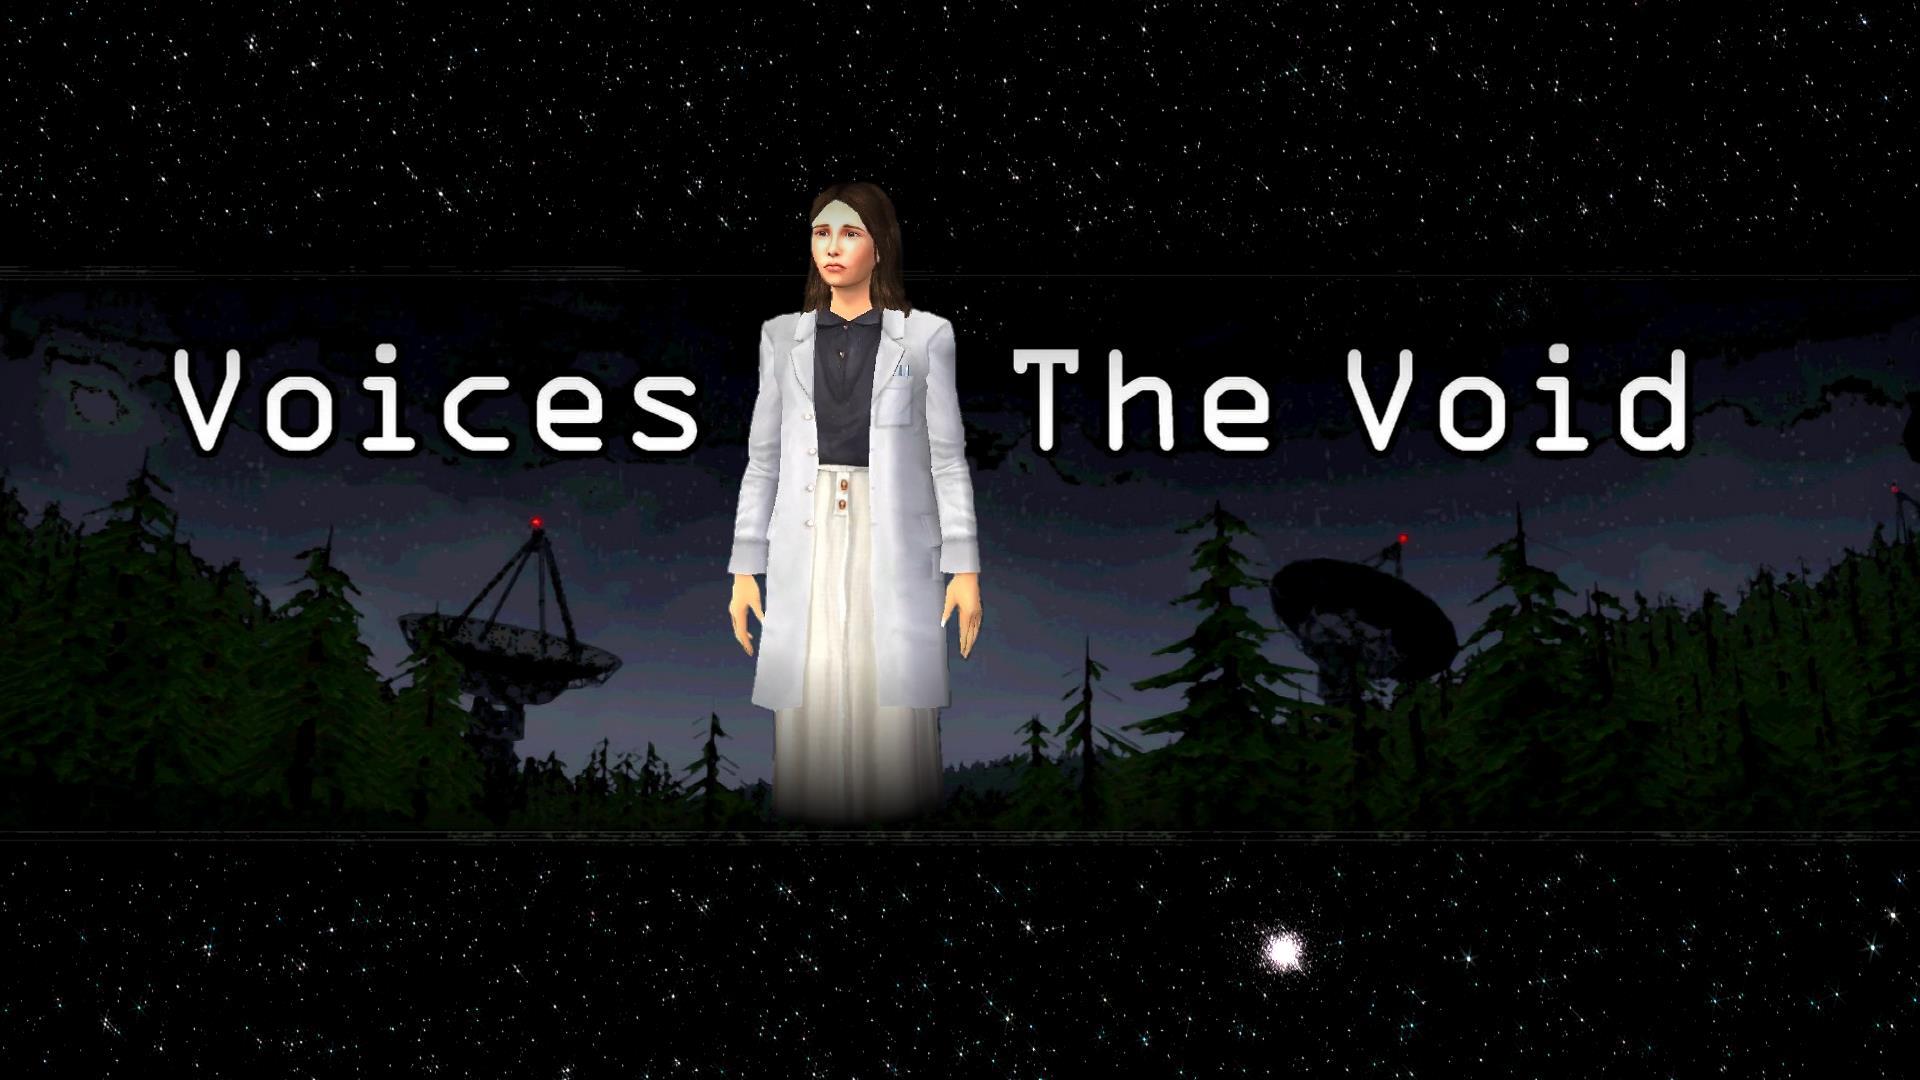 Voices of the void игрушки. Voices of the Void игра. Voices of the Void моды. Сны Voices of the Void. Voices of the Void русский язык.